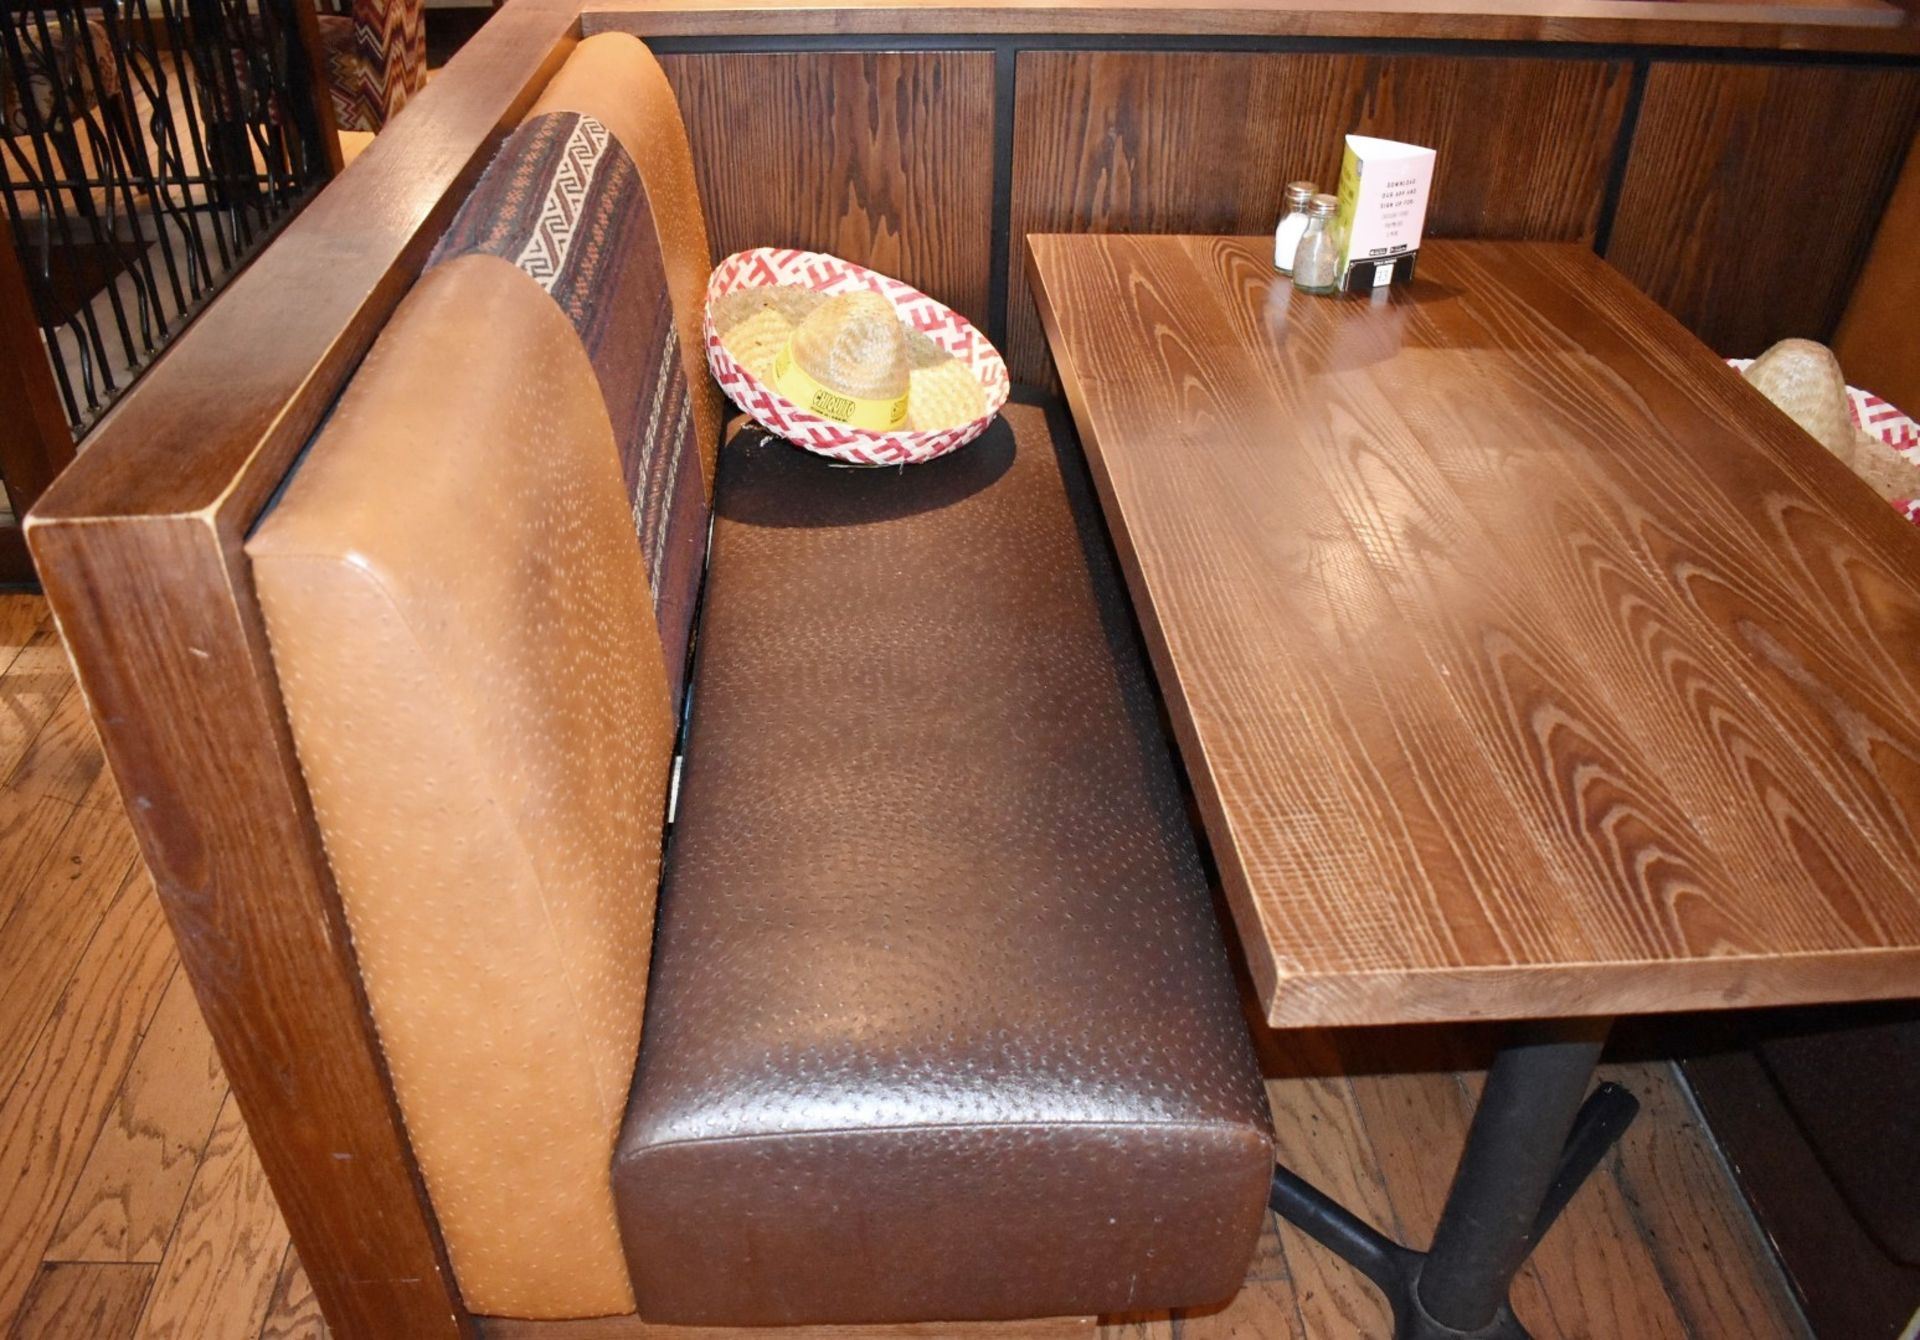 15-Pieces Of Restaurant Booth Seating Of Varying Length - Image 3 of 22